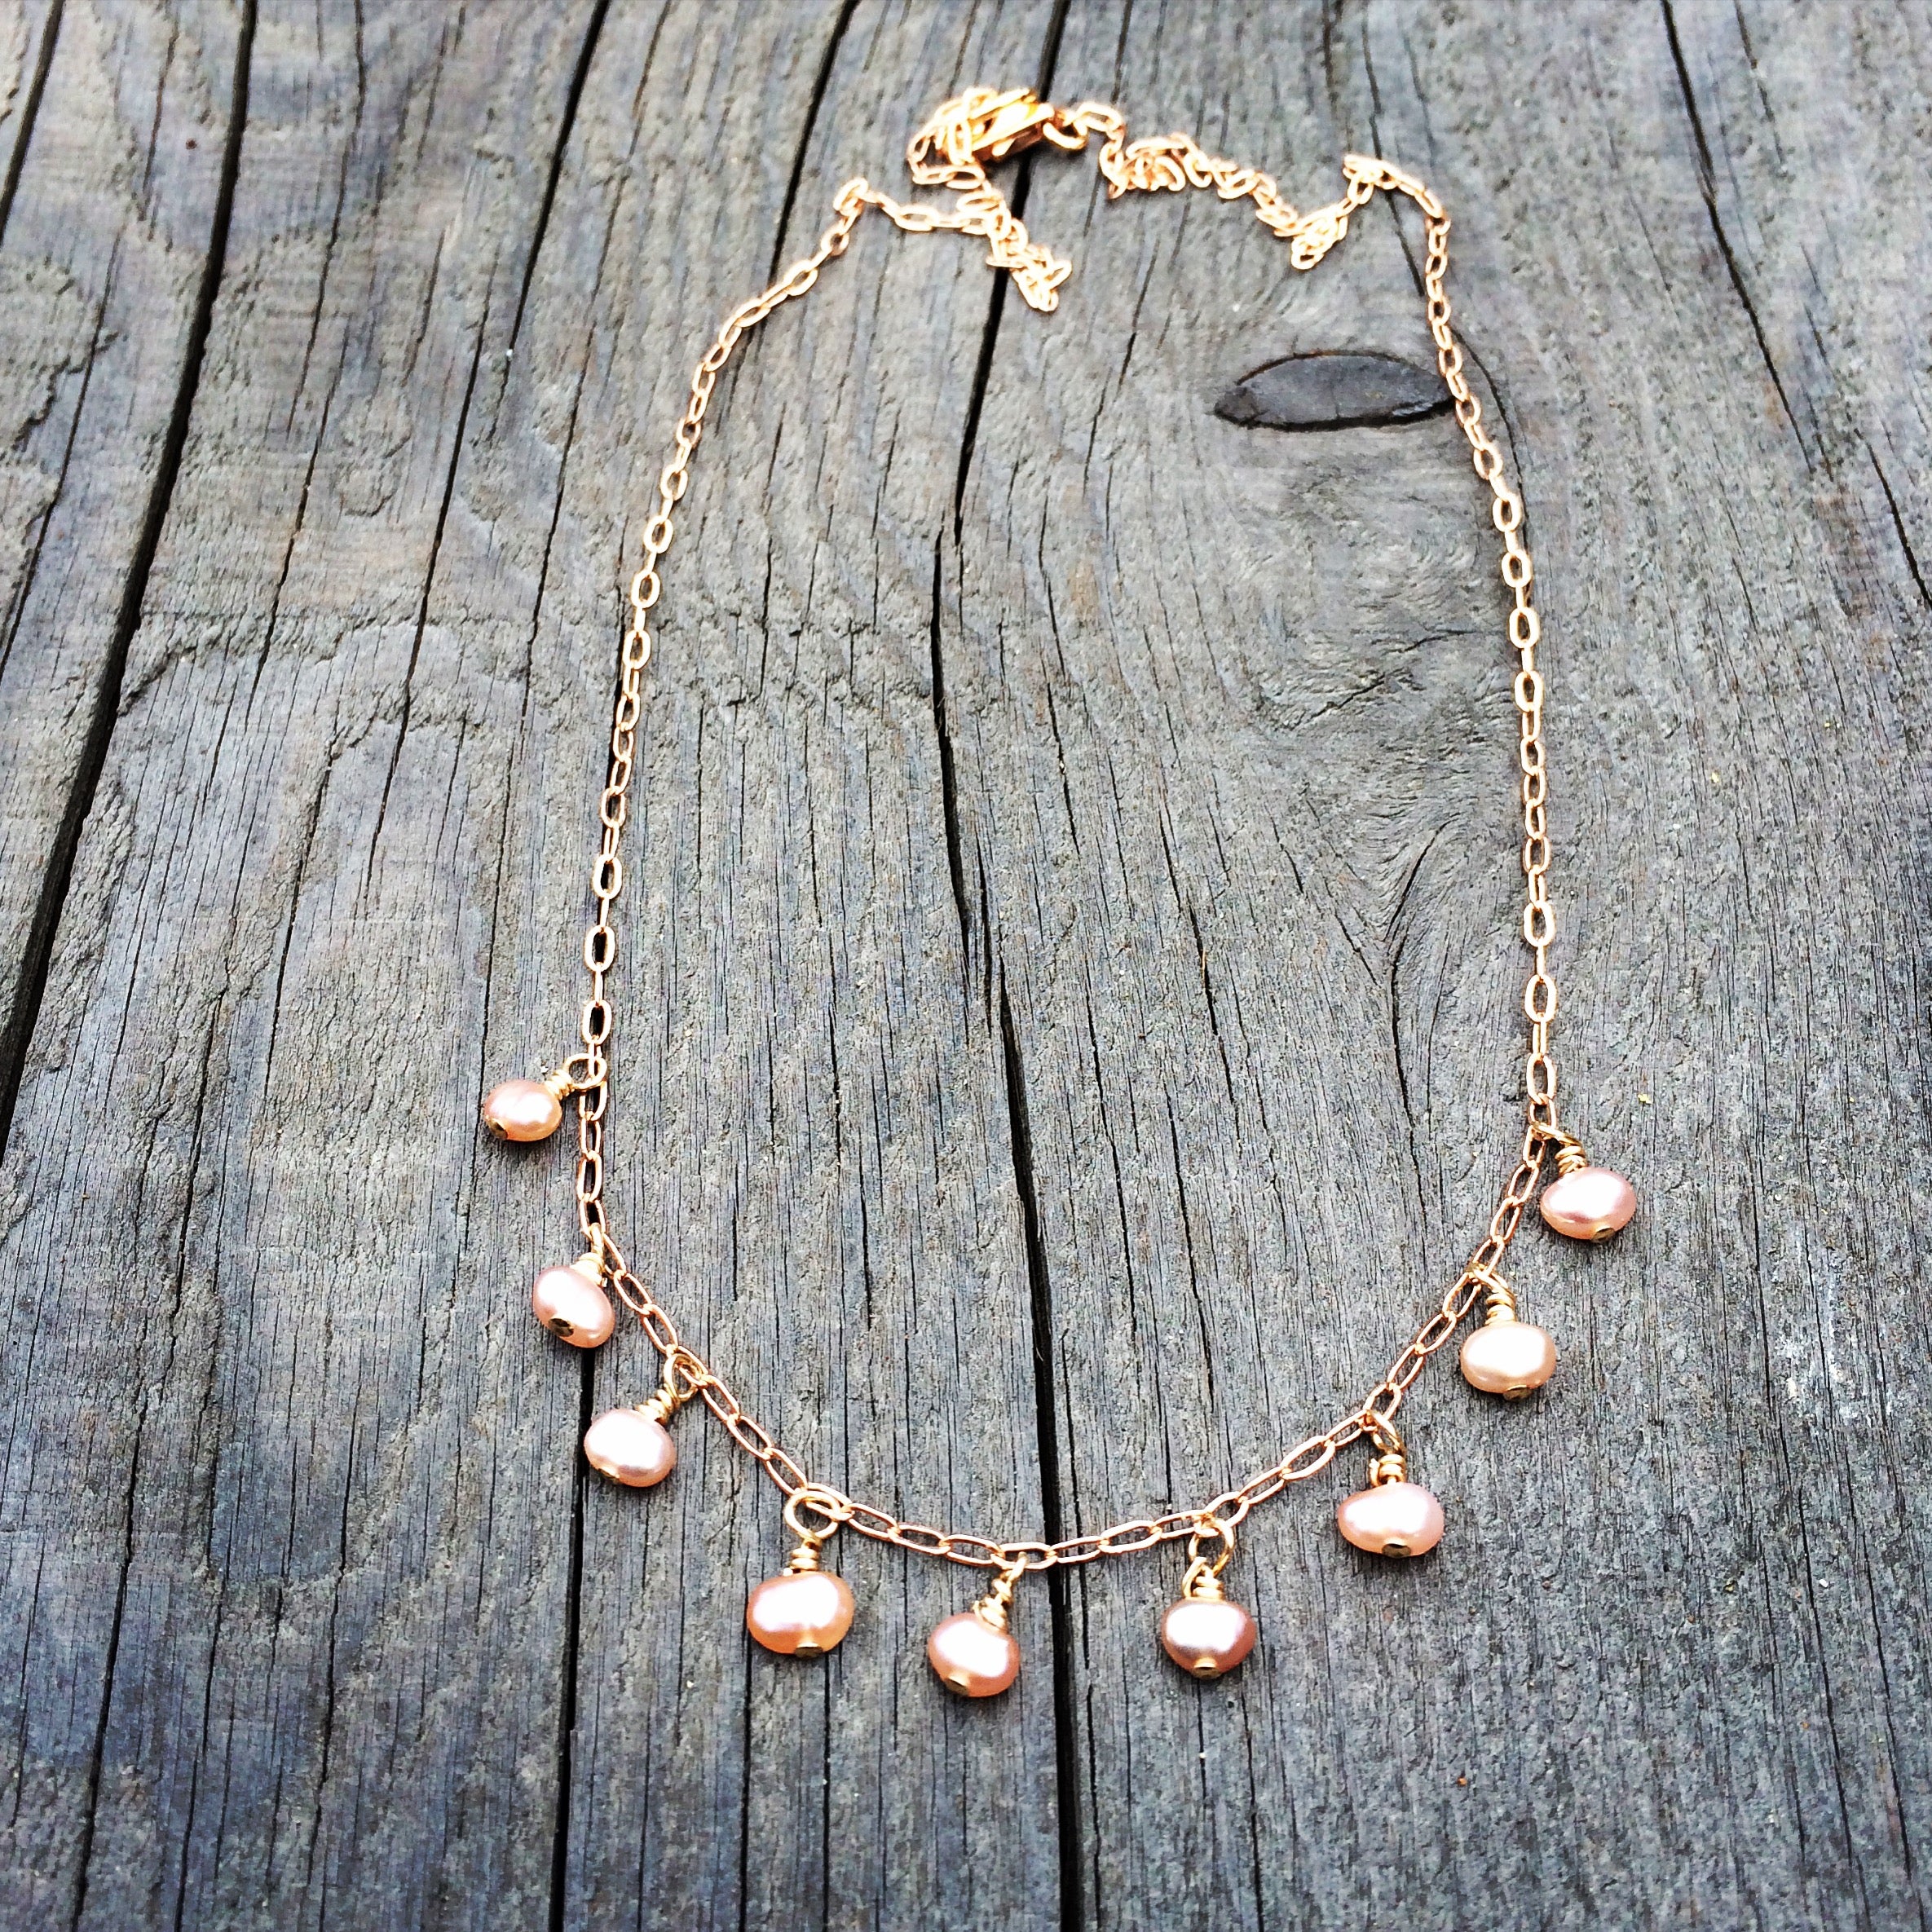 necklace with 9 tiny pink pearls spaced 1'4 inch apart dangling on a gold chain on wooden background